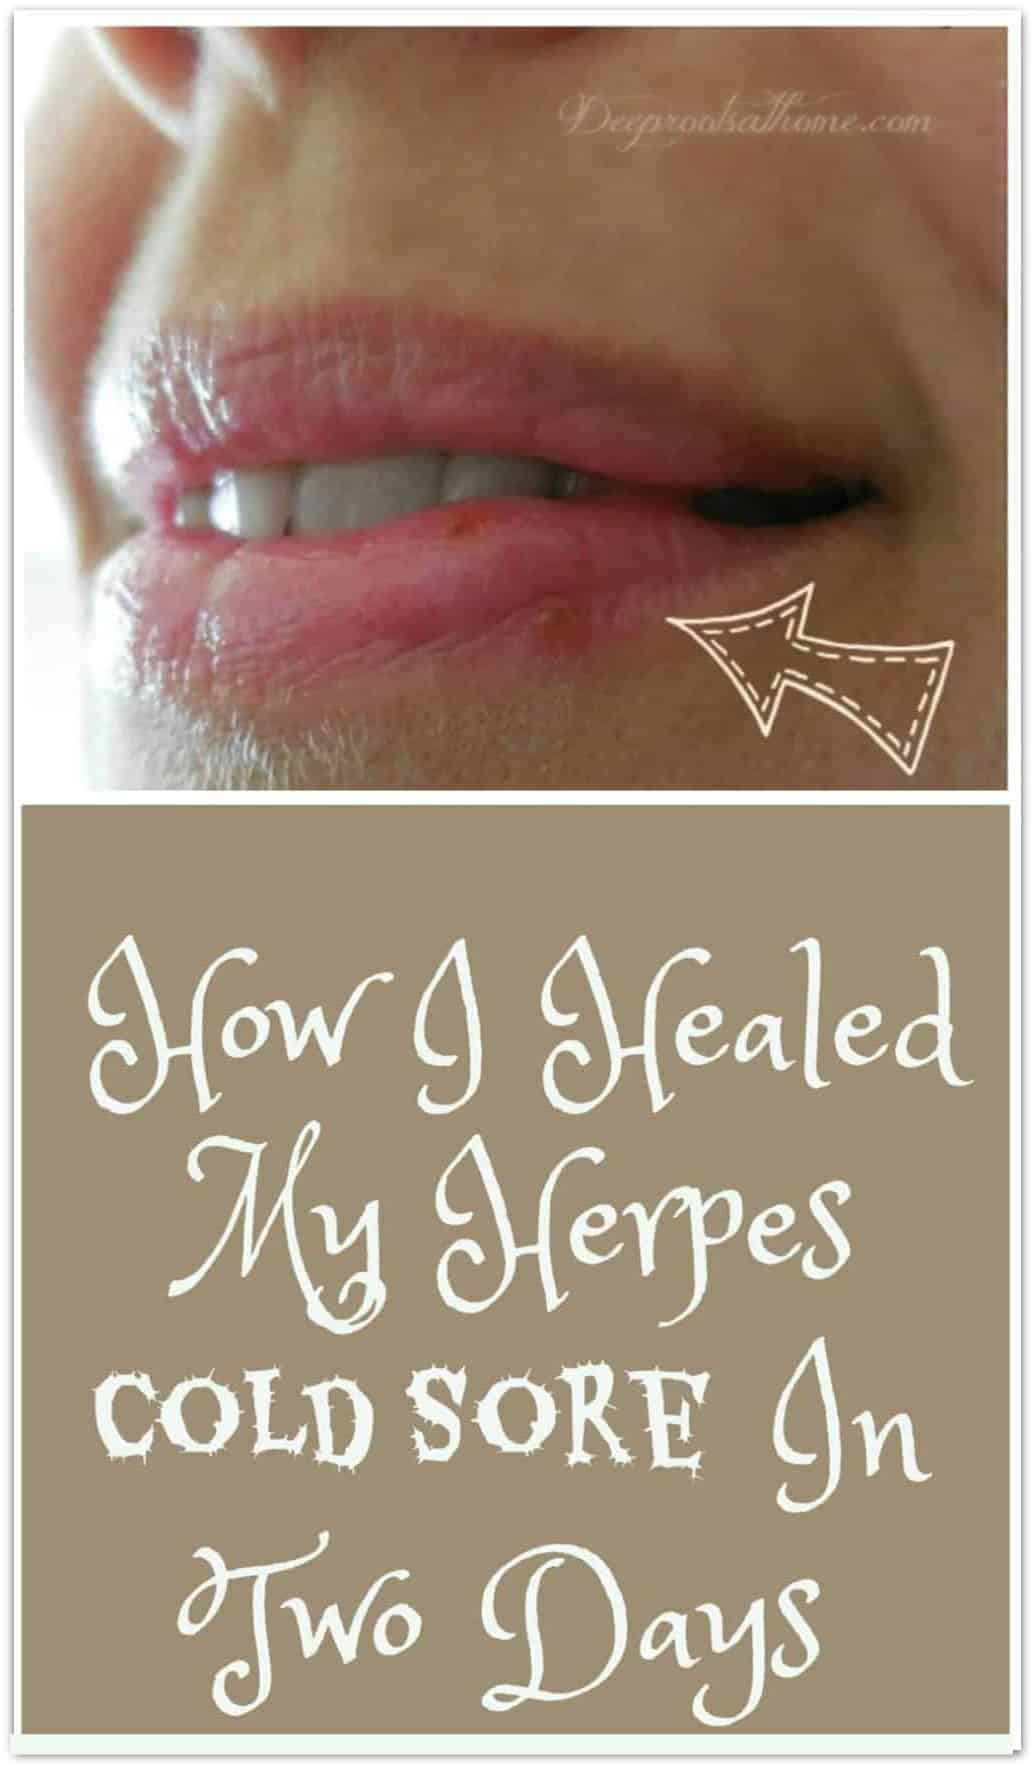 My Protocol To Dry Up & Heal A Herpes Cold Sore In 2 To 3 Days